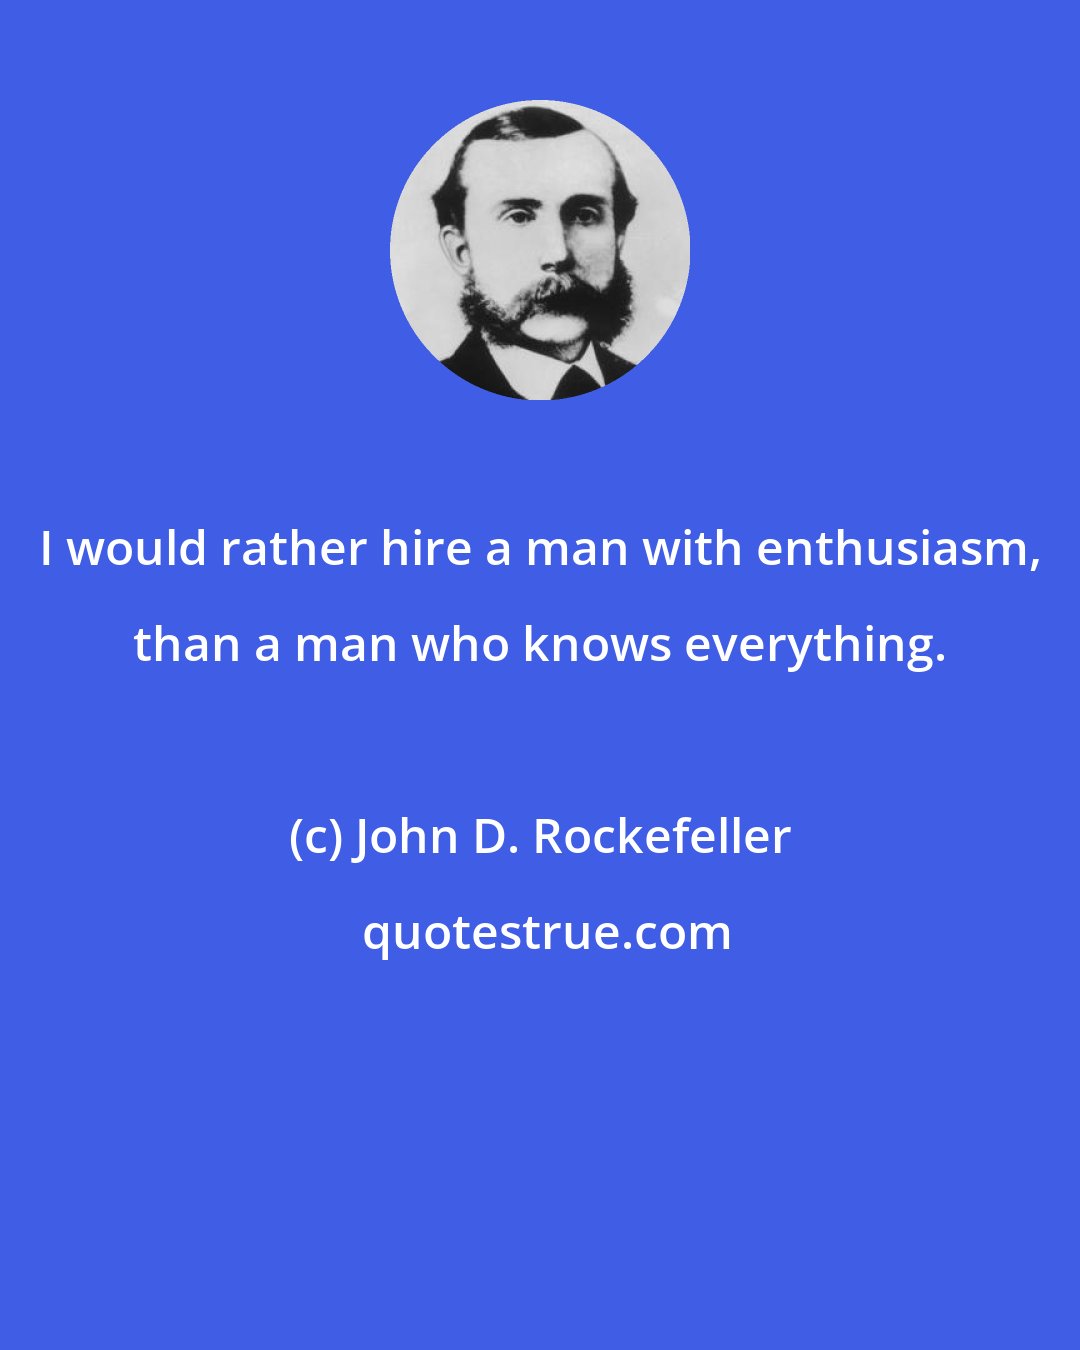 John D. Rockefeller: I would rather hire a man with enthusiasm, than a man who knows everything.